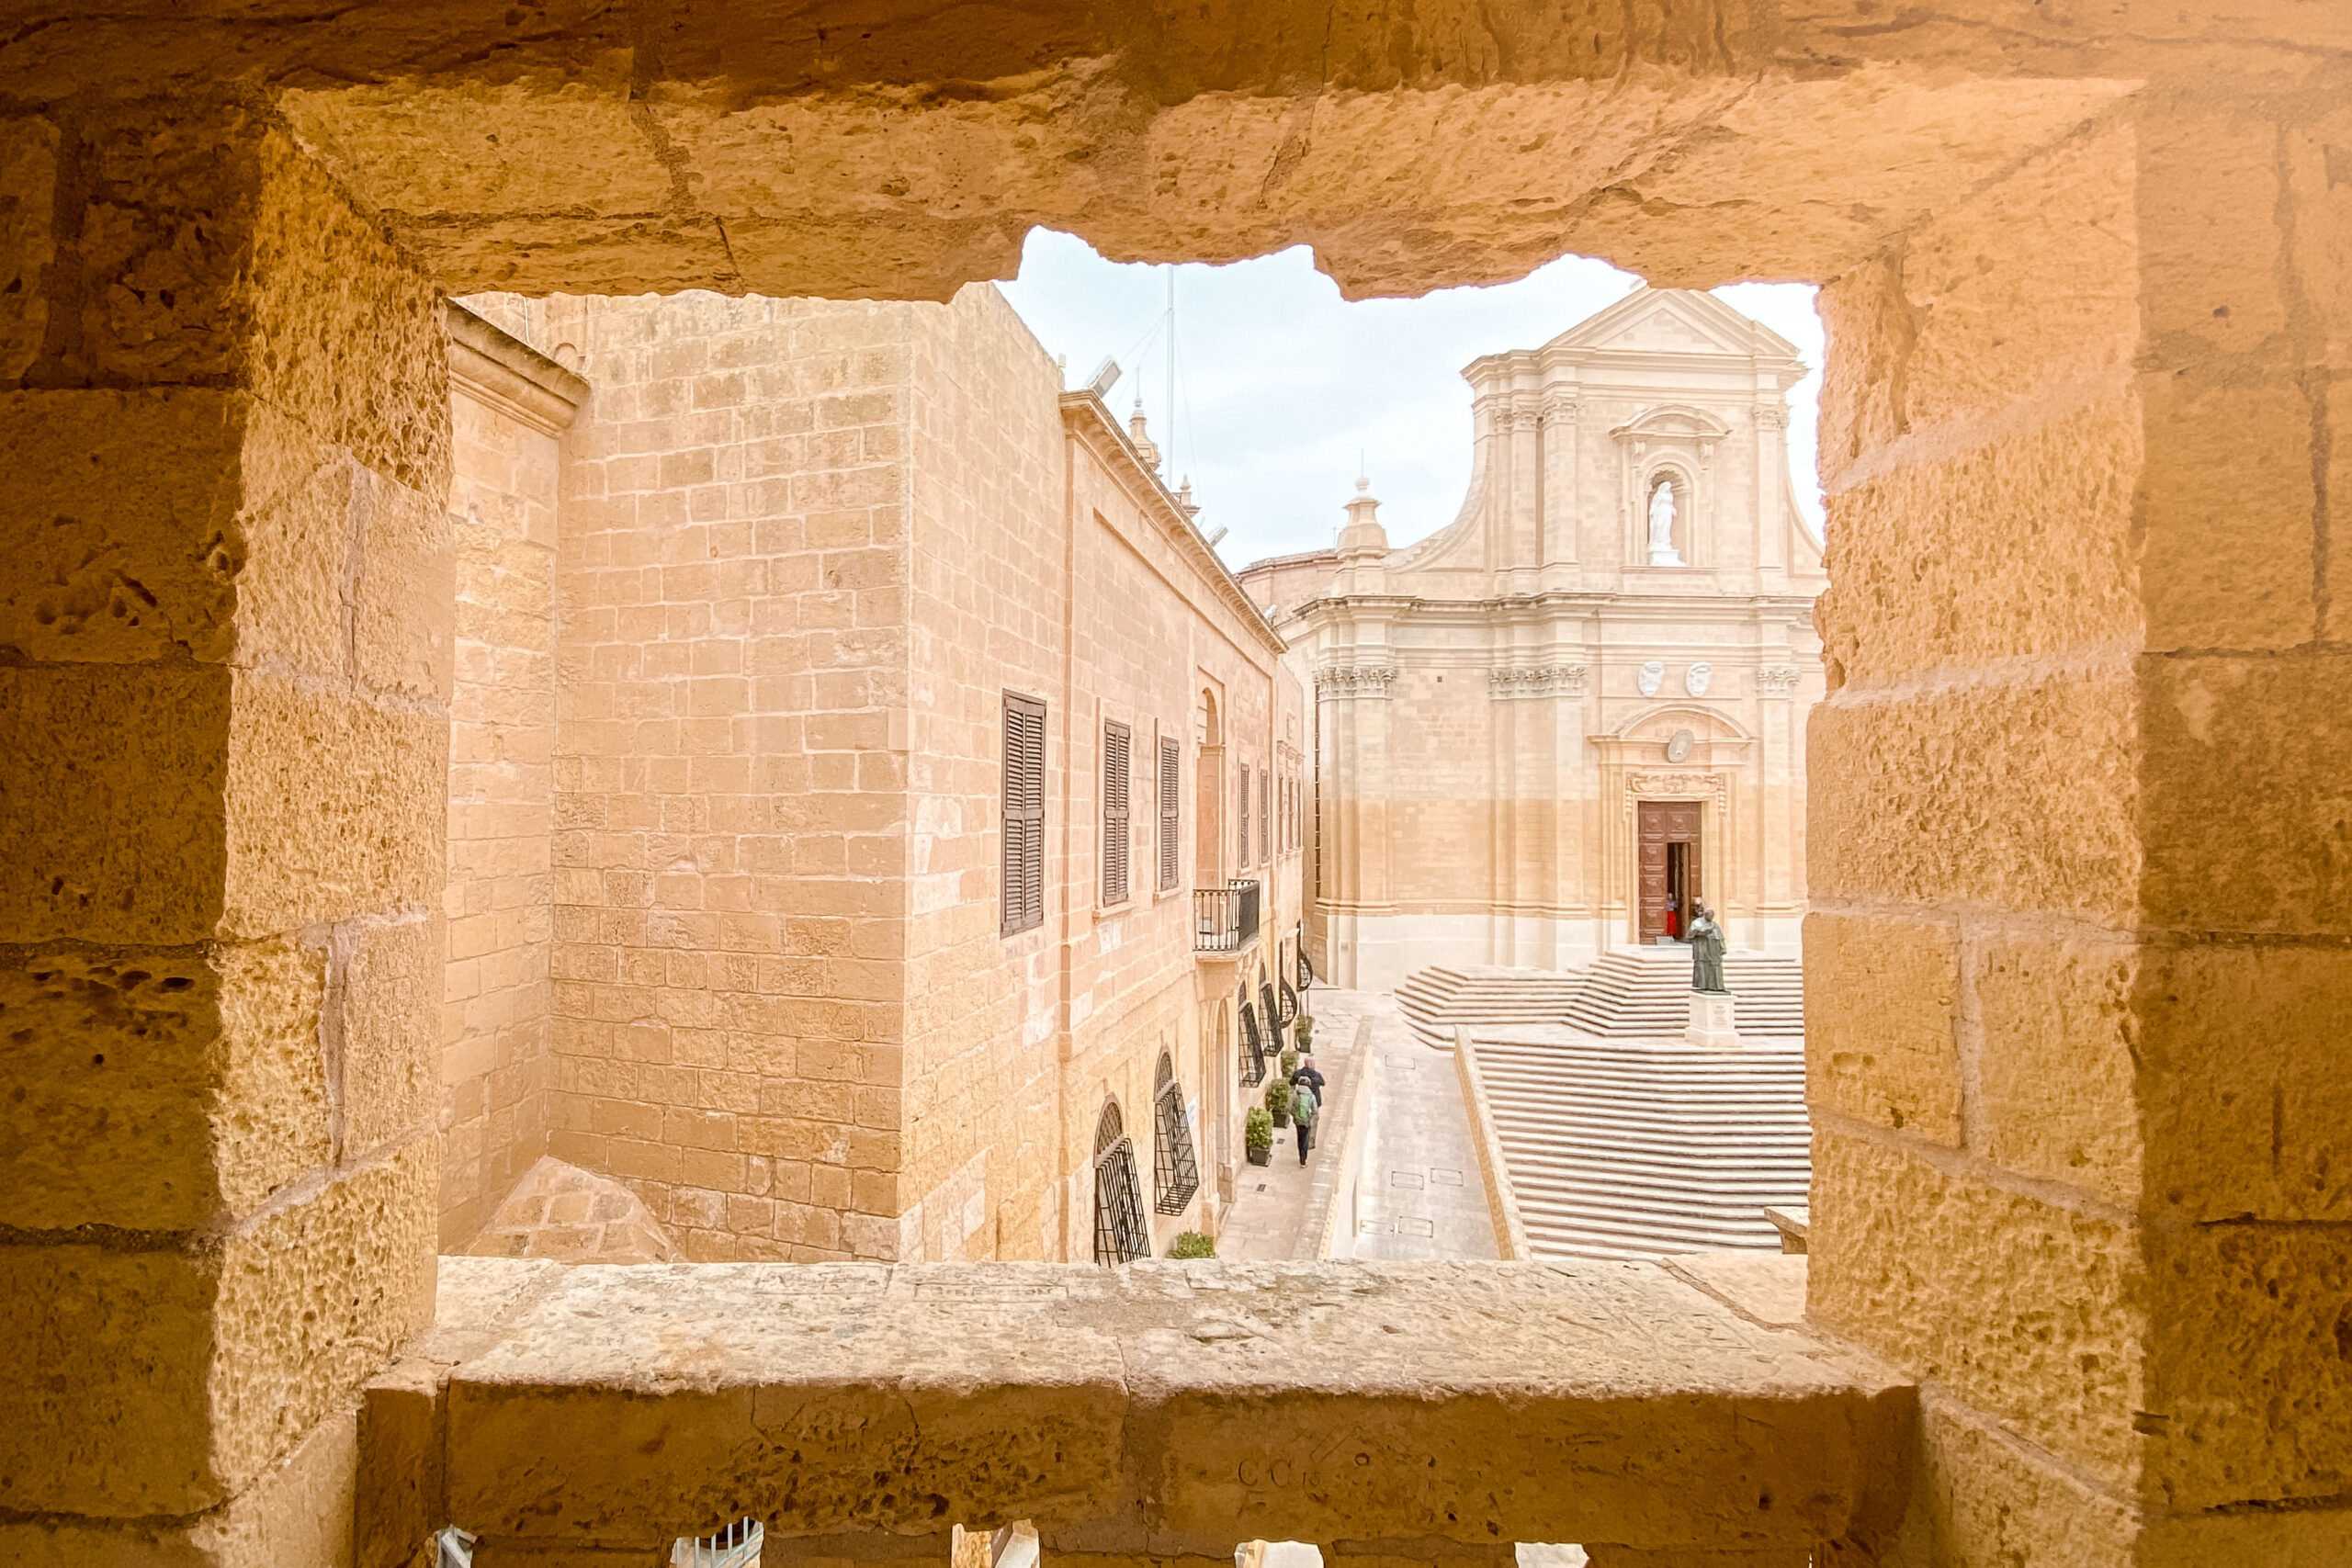 Cathedral of the Assumption seen from the Ciutadella in Victoria (Ir-Rabat) on Gozo island, Malta